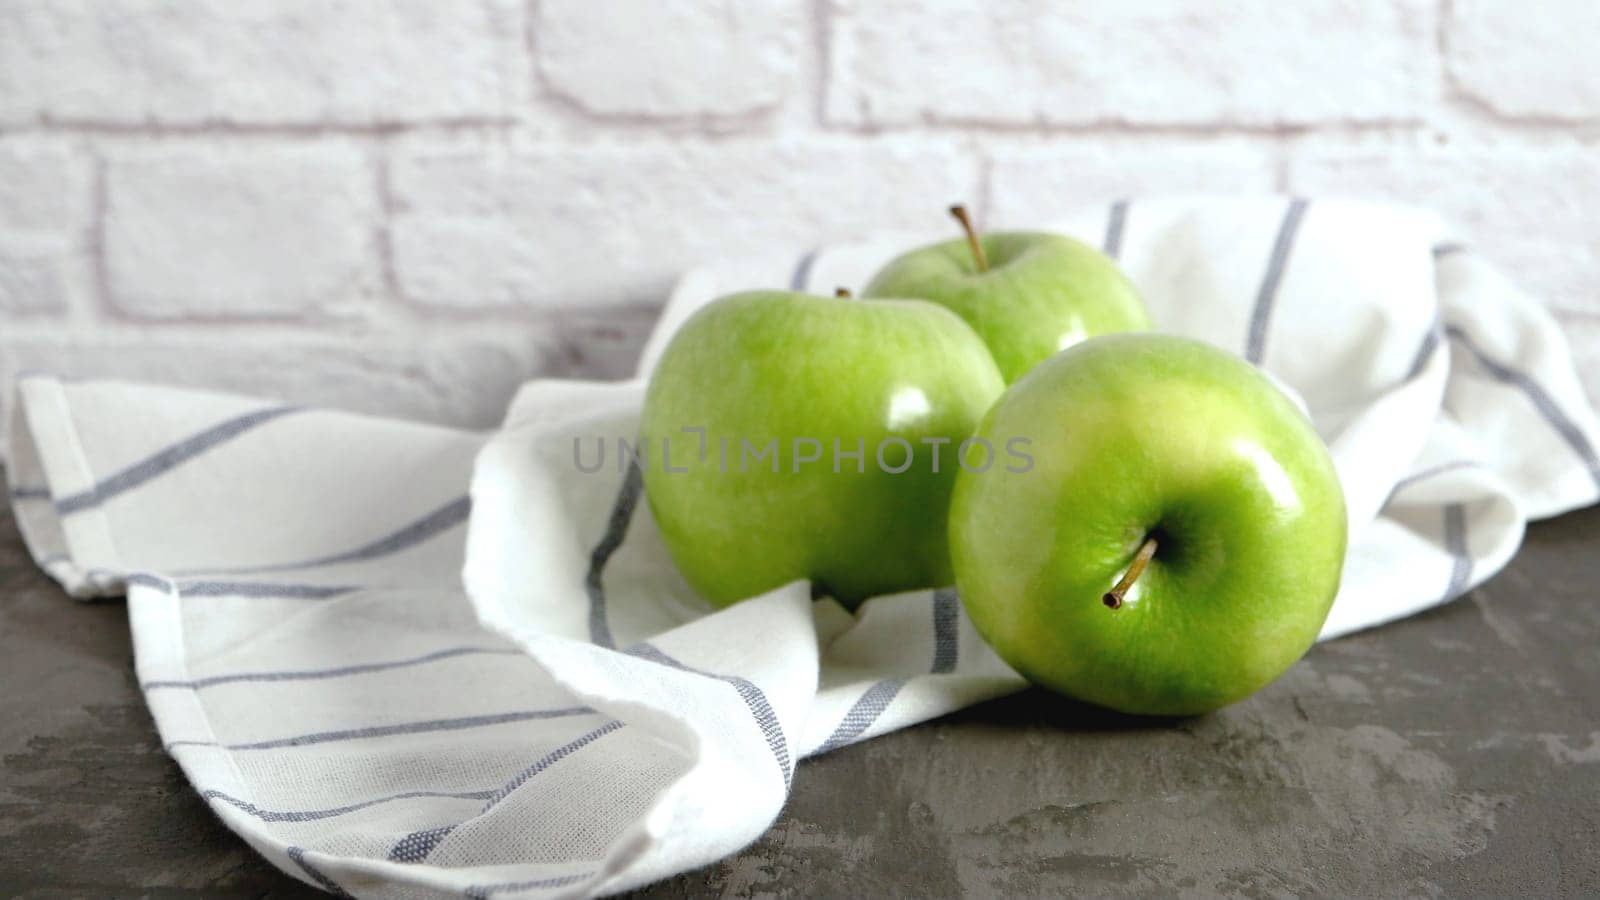 Ripe green apples and napkin on kitchen counter top.